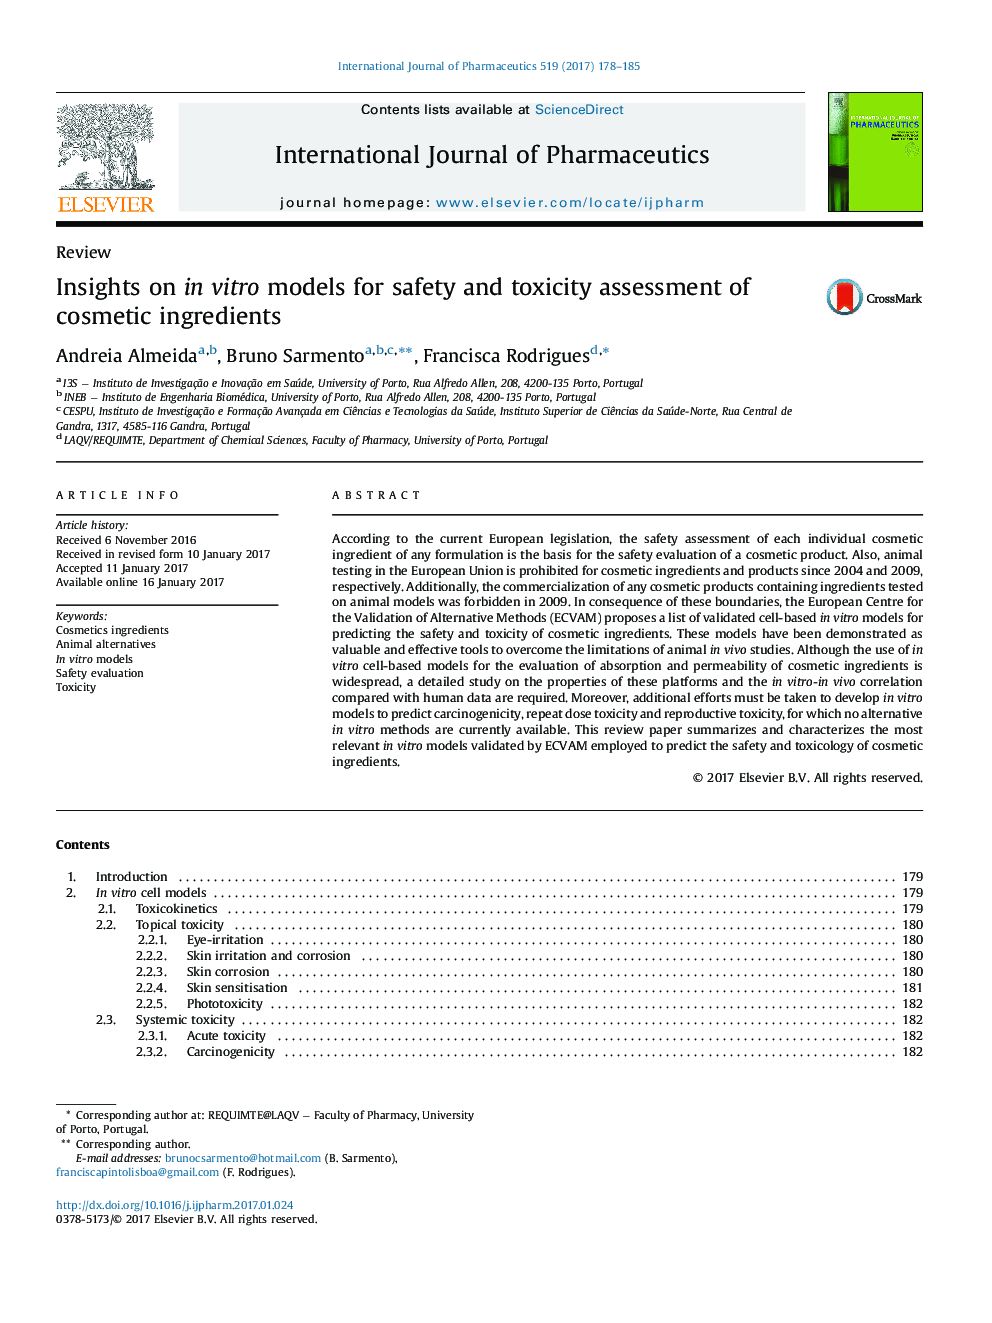 Insights on in vitro models for safety and toxicity assessment of cosmetic ingredients